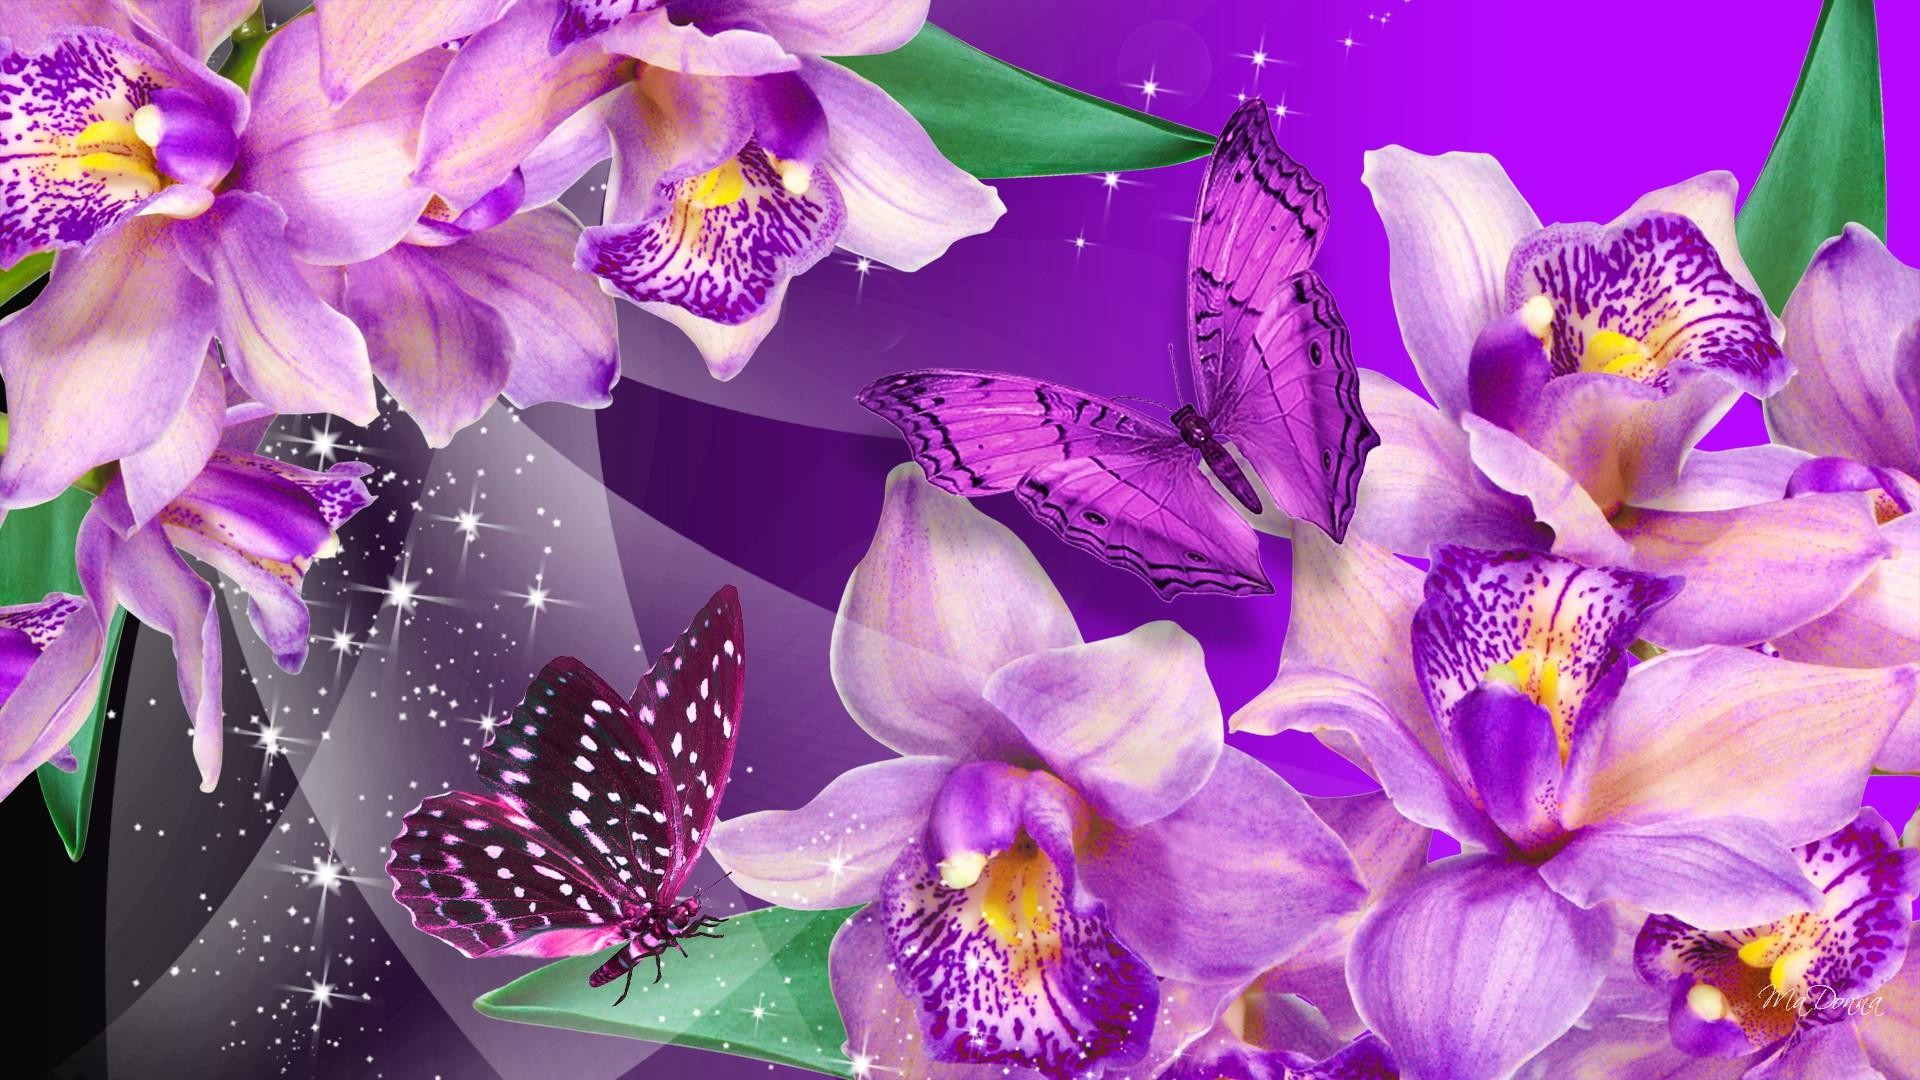 1920x1080 purple Butterfly are free to fly | HD Orchid Butterfly Dance Wallpaper